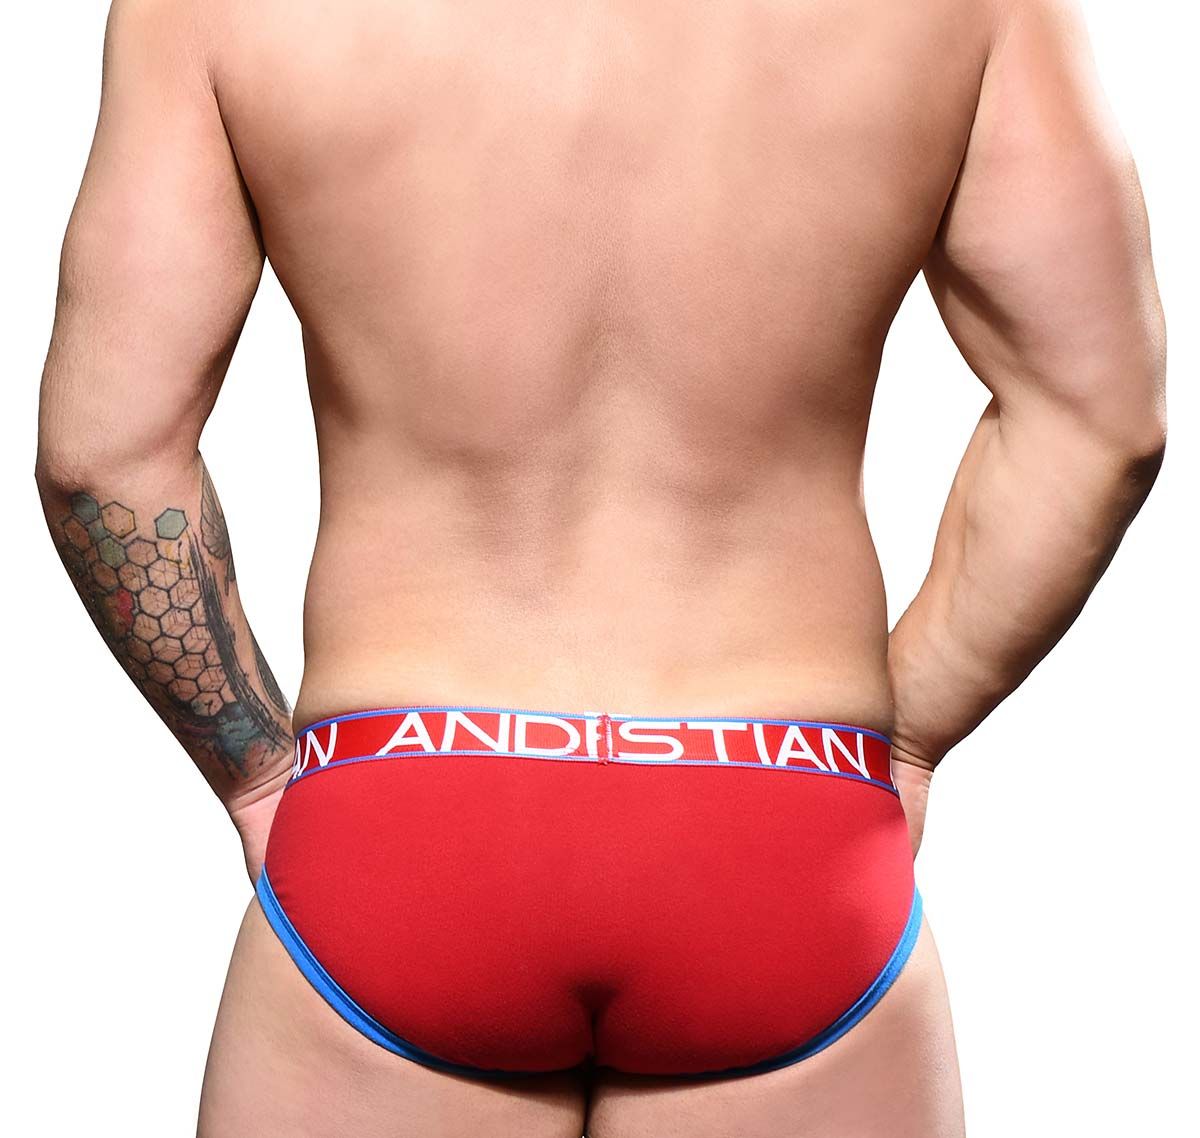 Andrew Christian Slip FLY TAGLESS BRIEF w/ ALMOST NAKED 92187, rojo